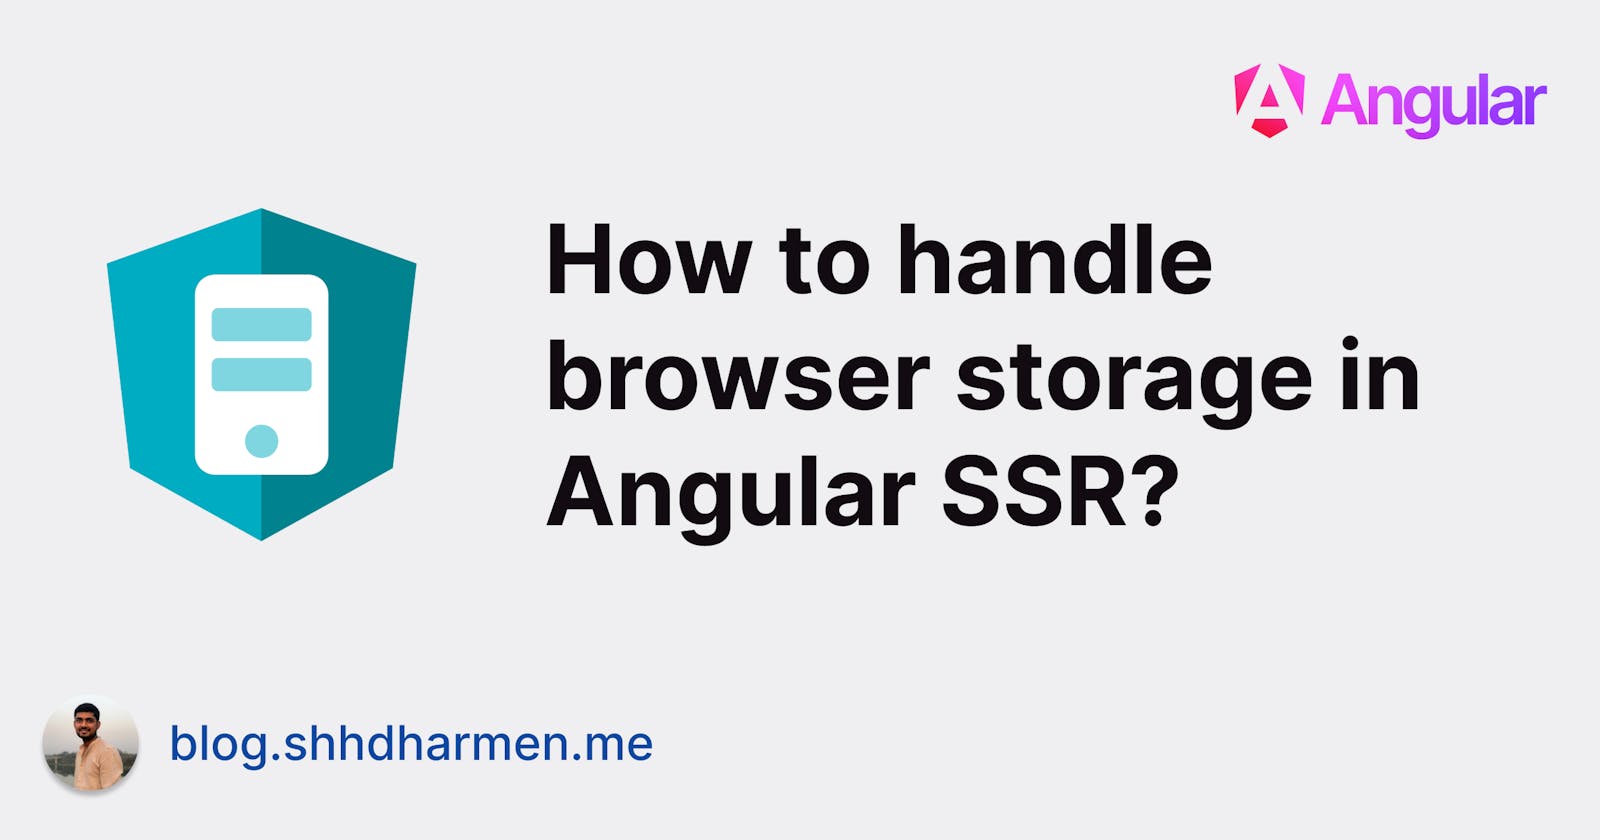 How to handle browser storage in Angular SSR?